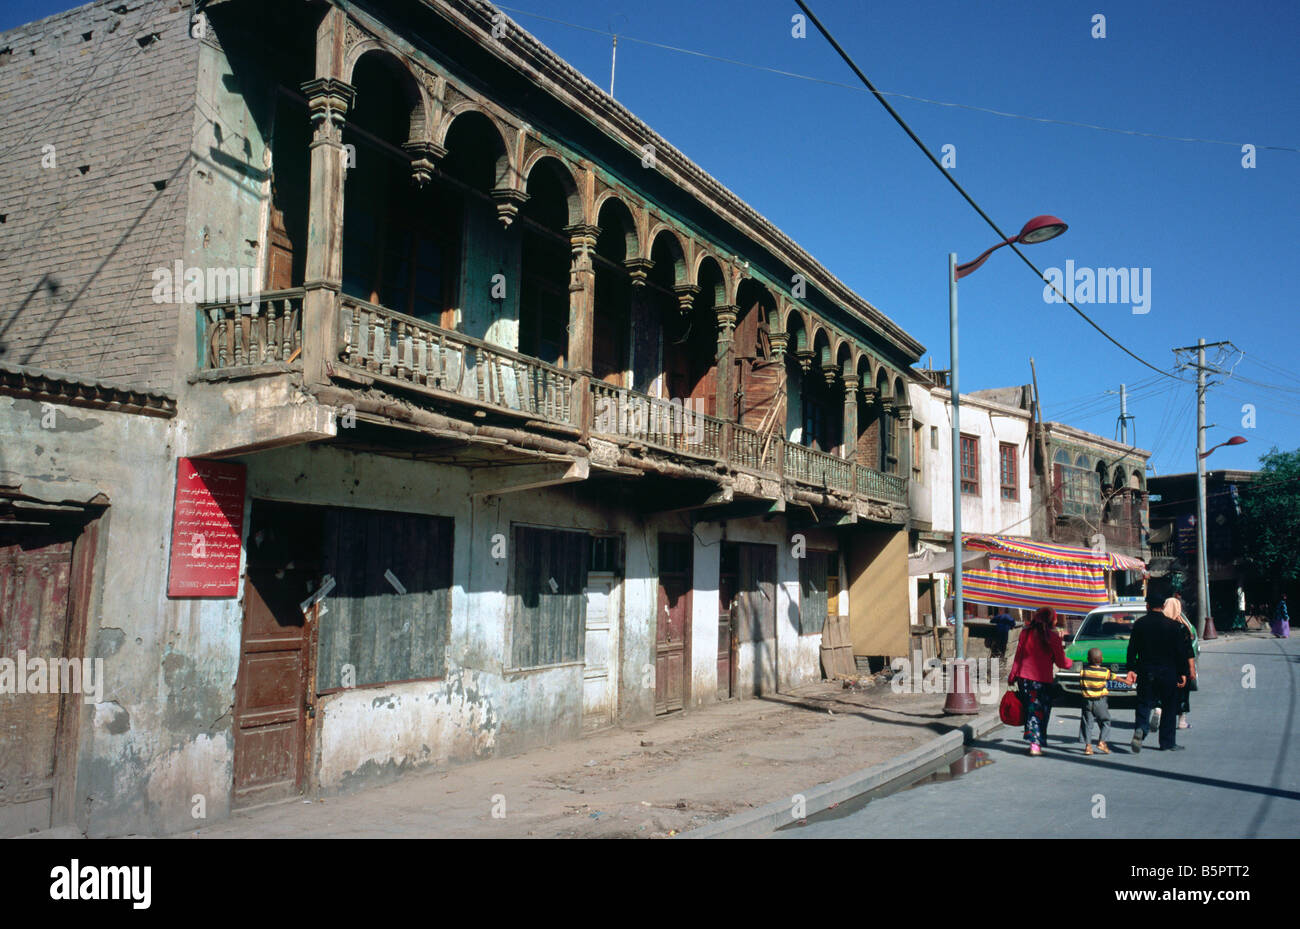 July 1, 2006 - Historic district of the city of Kashgar in the Chinese province of Xinjiang. Stock Photo